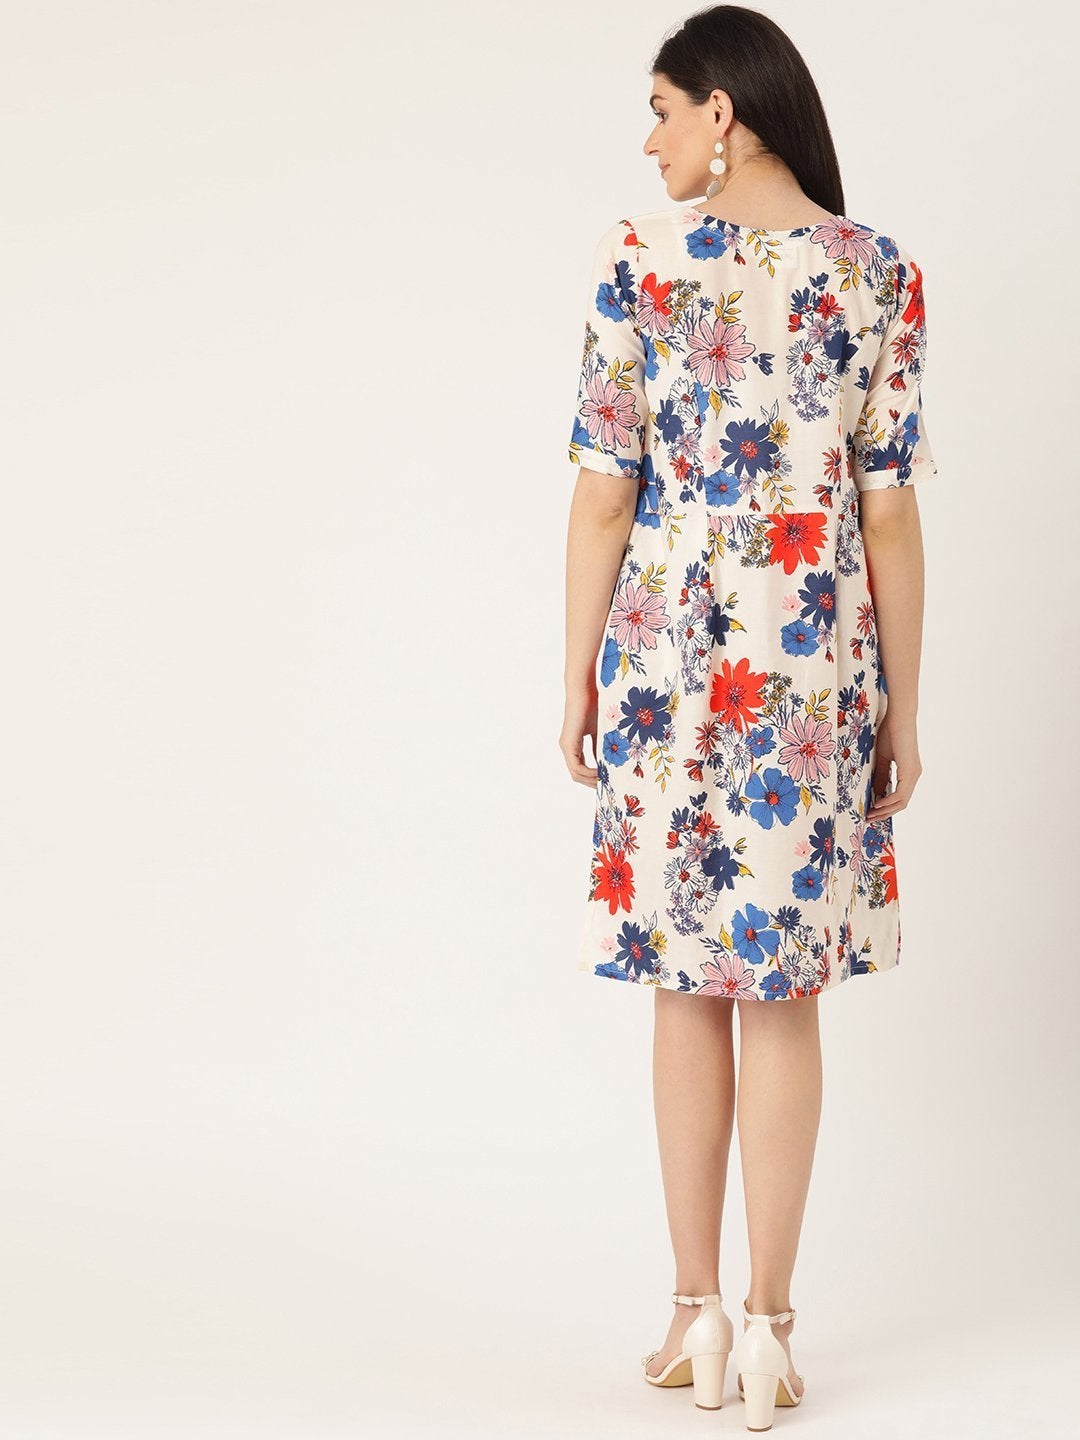 Women's Floral Printed Dress With Pockets - InWeave